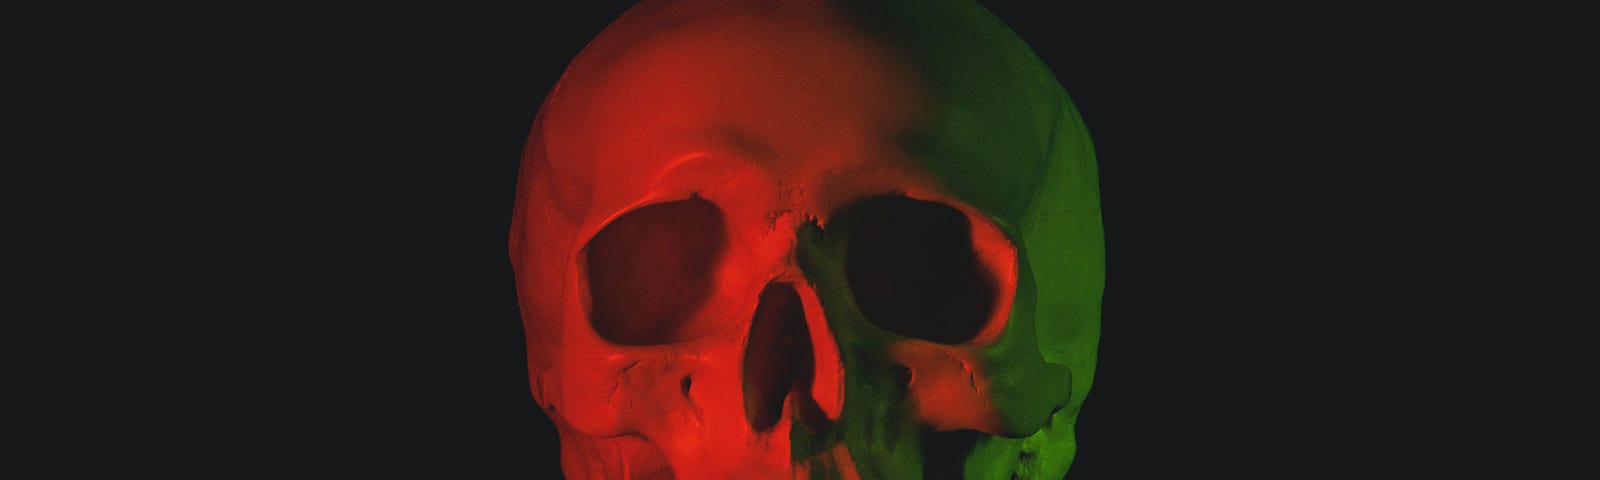 The photo is of a human skull, centered on a black background. It’s cast in read, orange and yellow mood lighting.